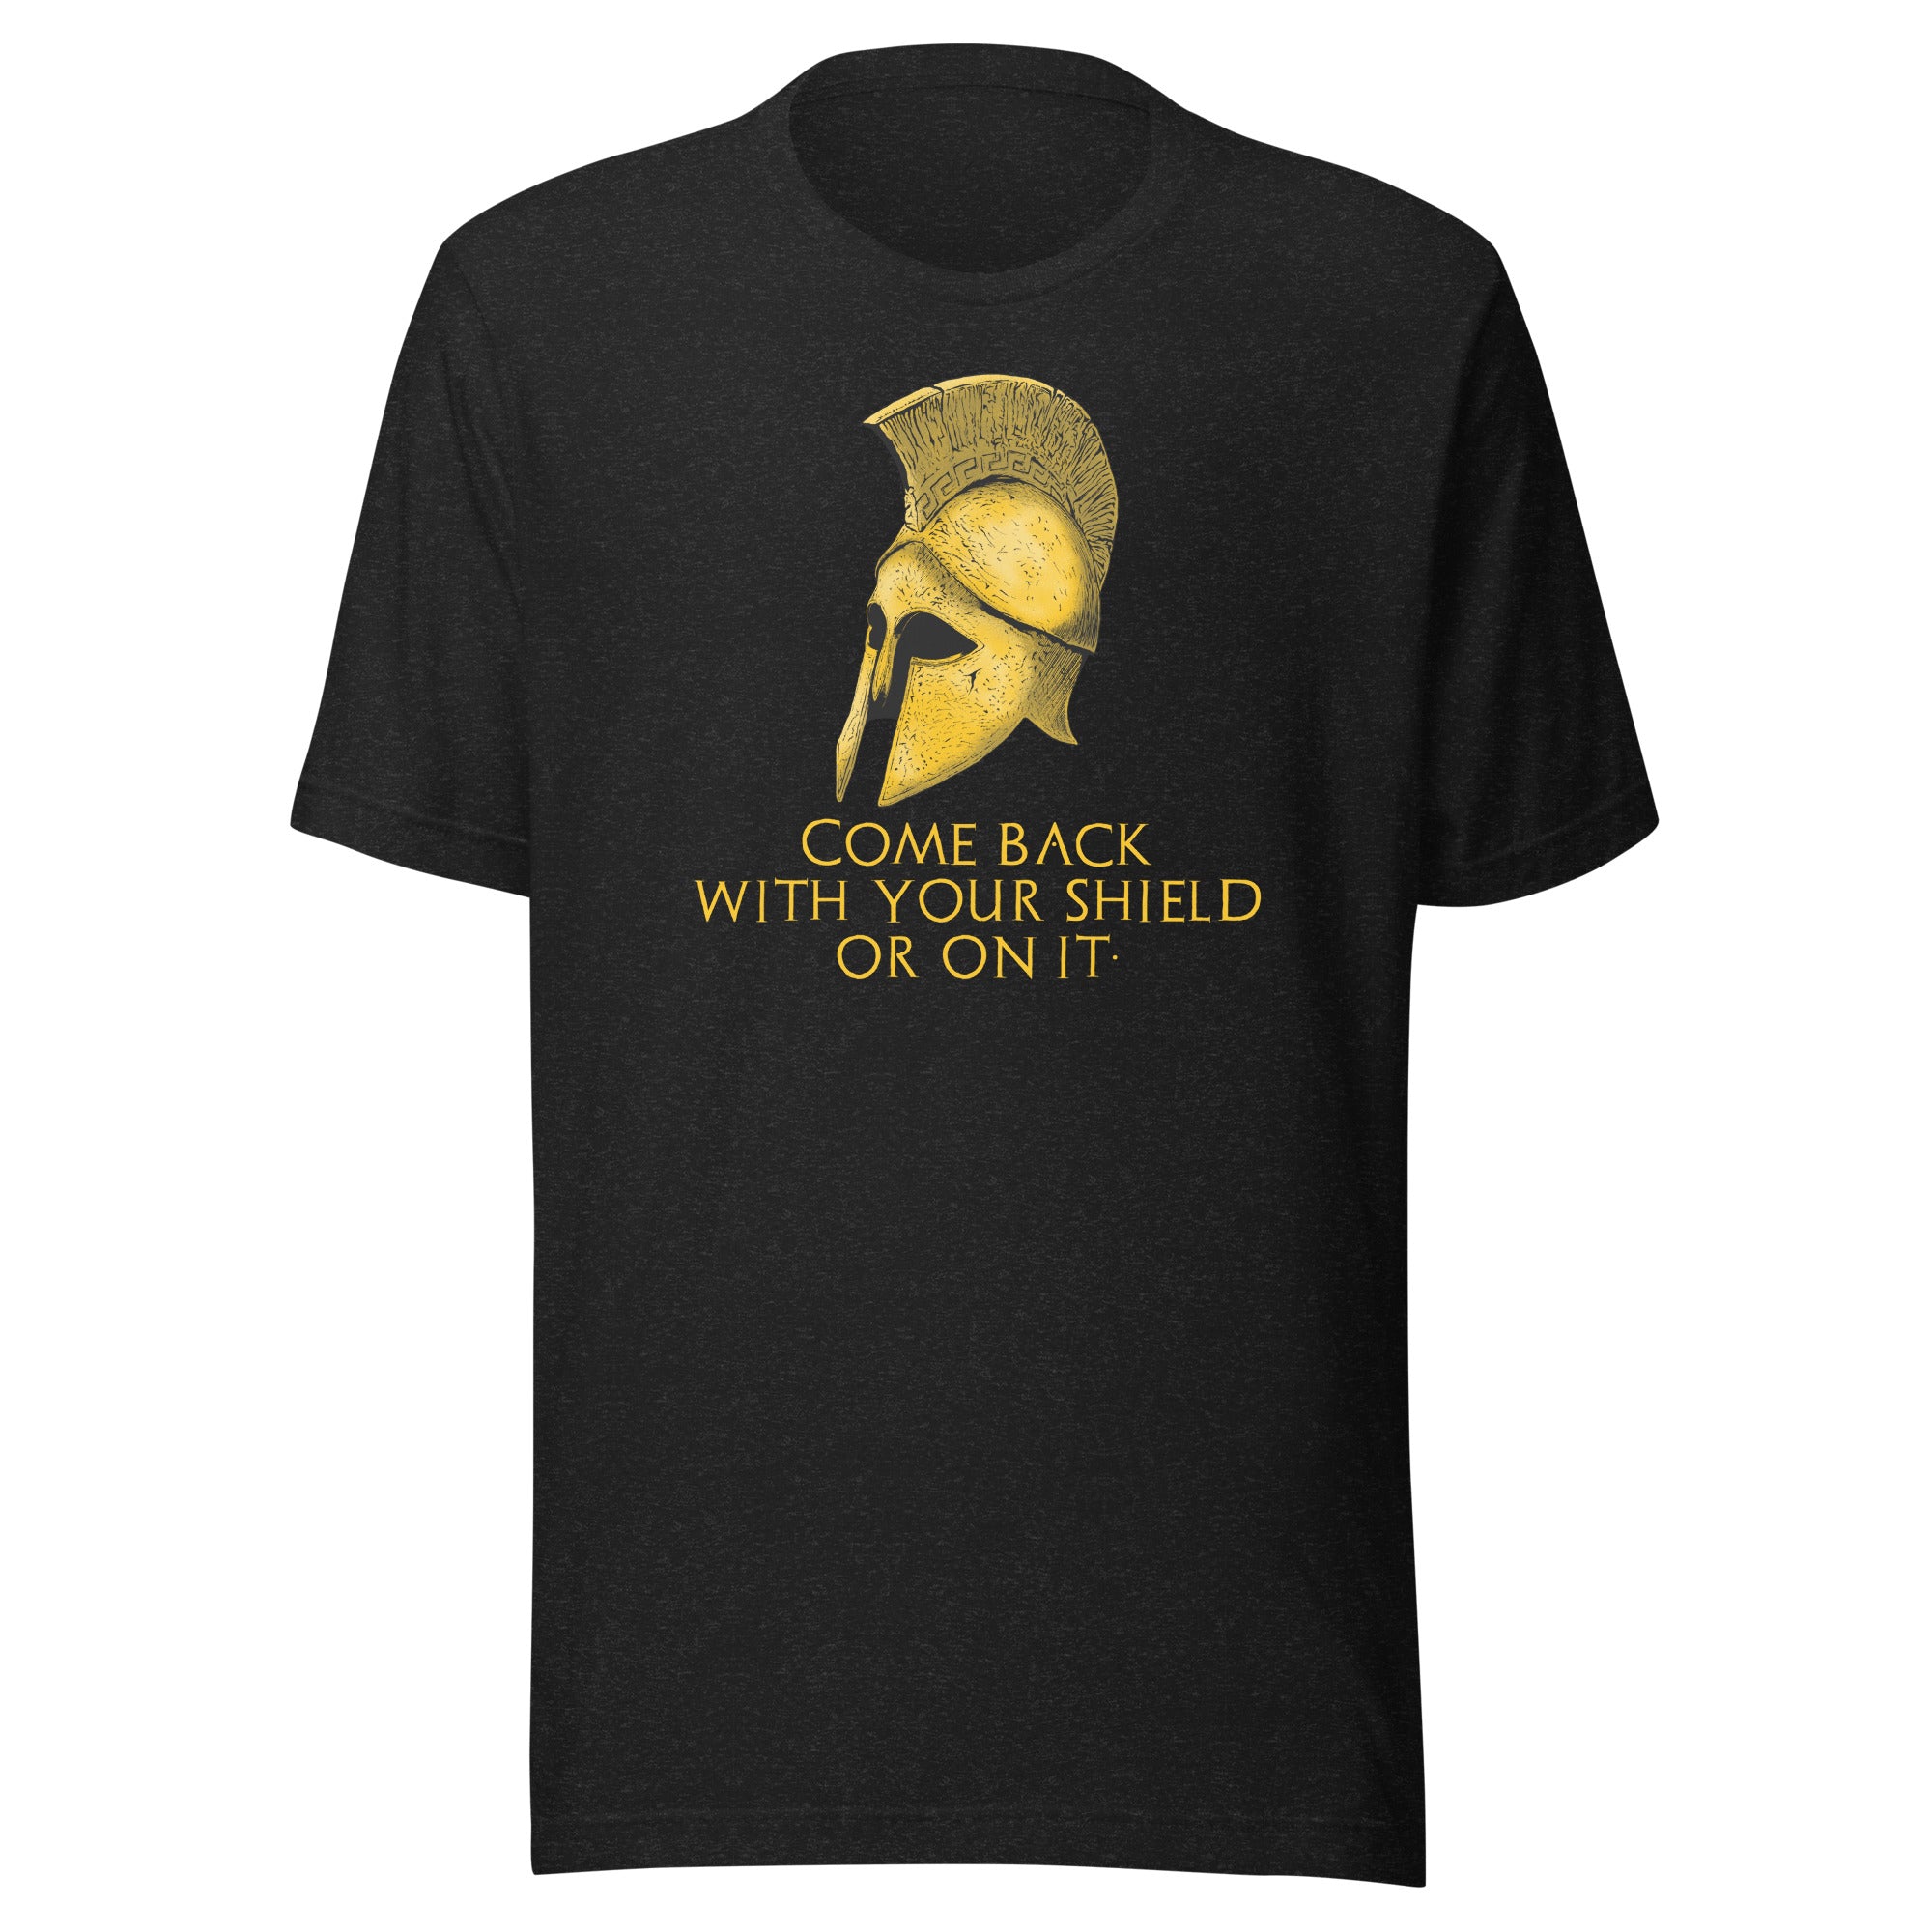 Come back with your shield or on it - Ancient Sparta - Unisex T-Shirt